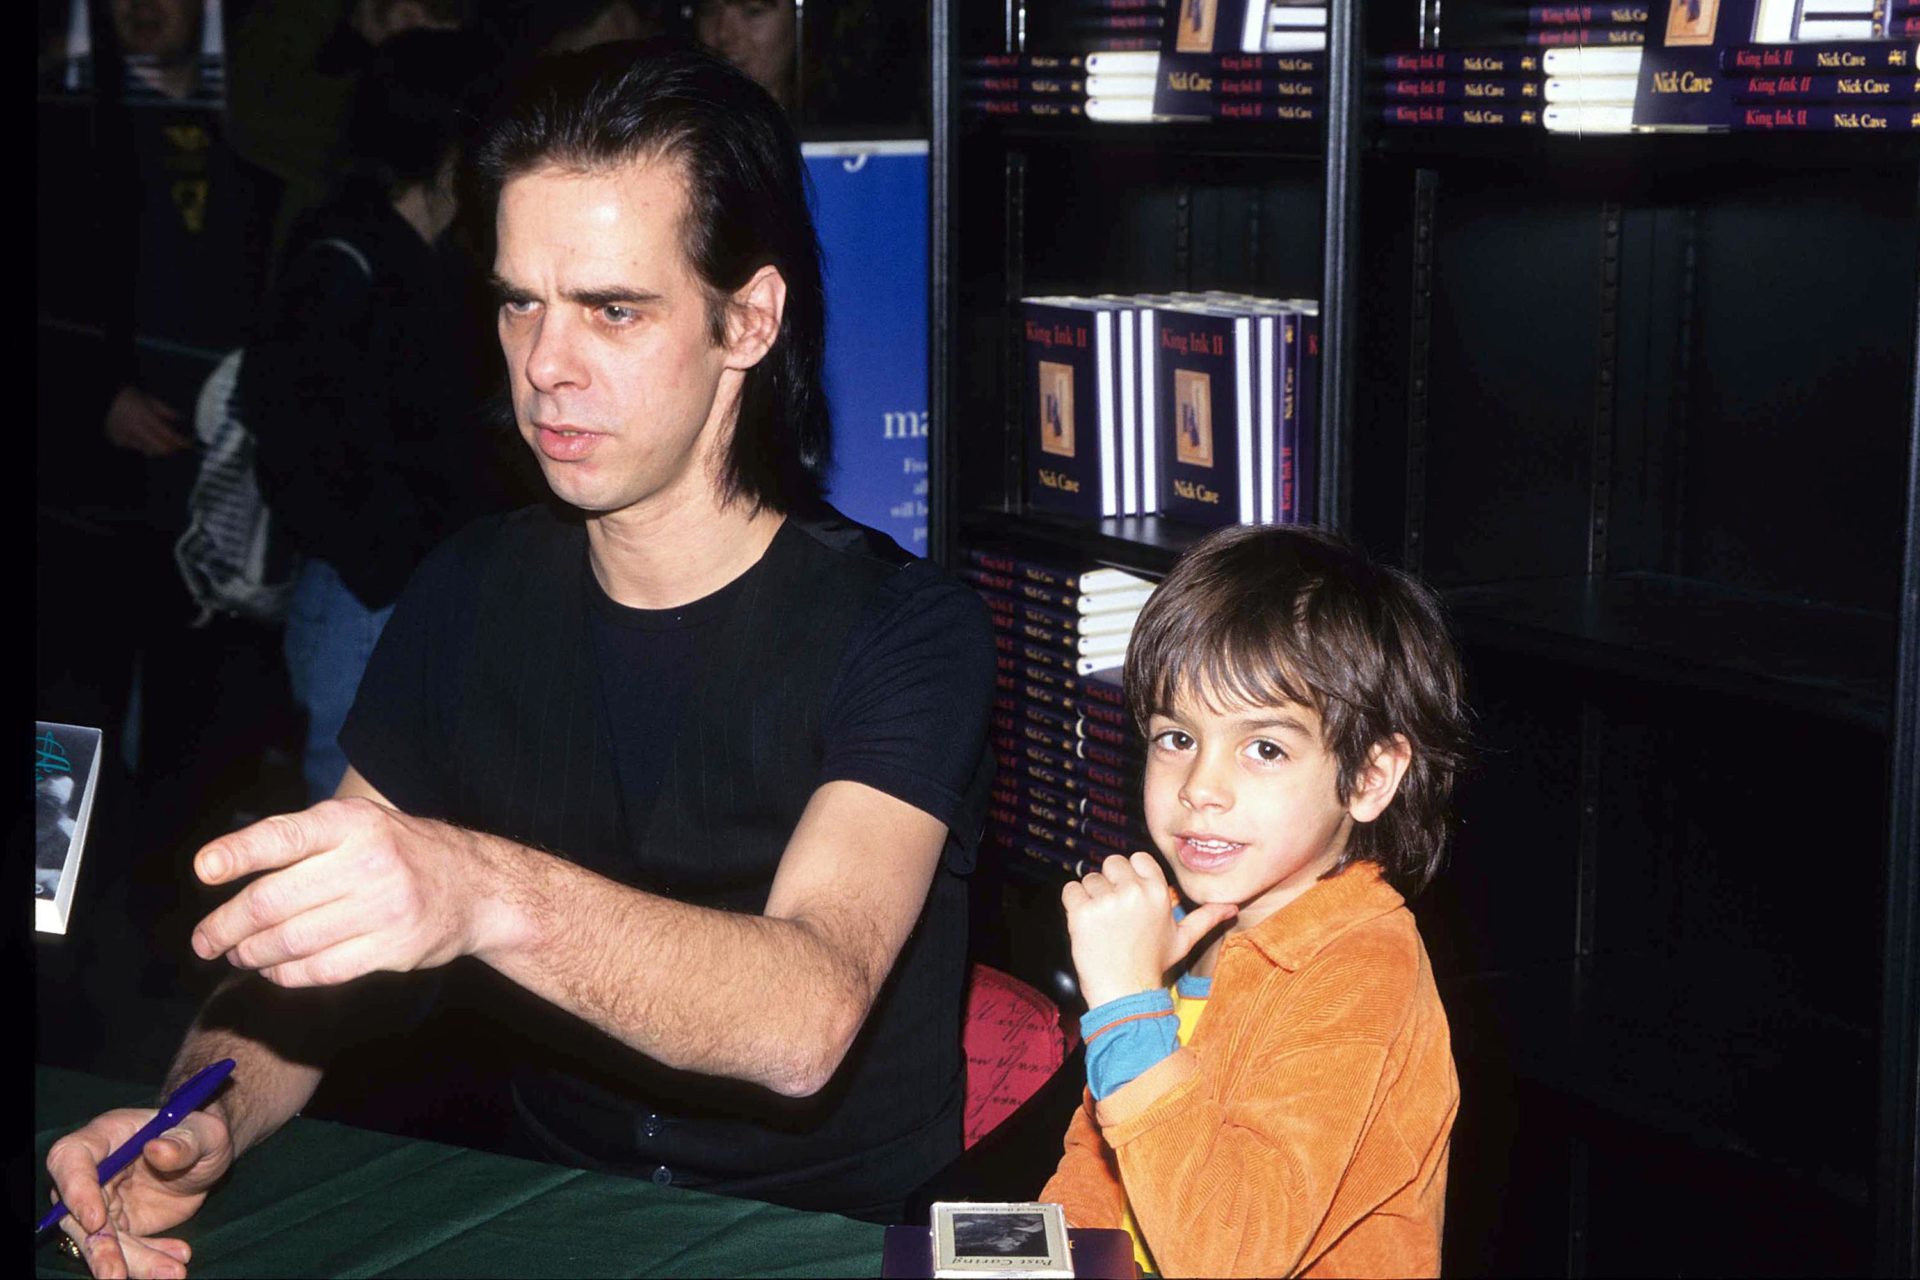 Nick Cave "King Ink II" Book Signing - March 1, 1997